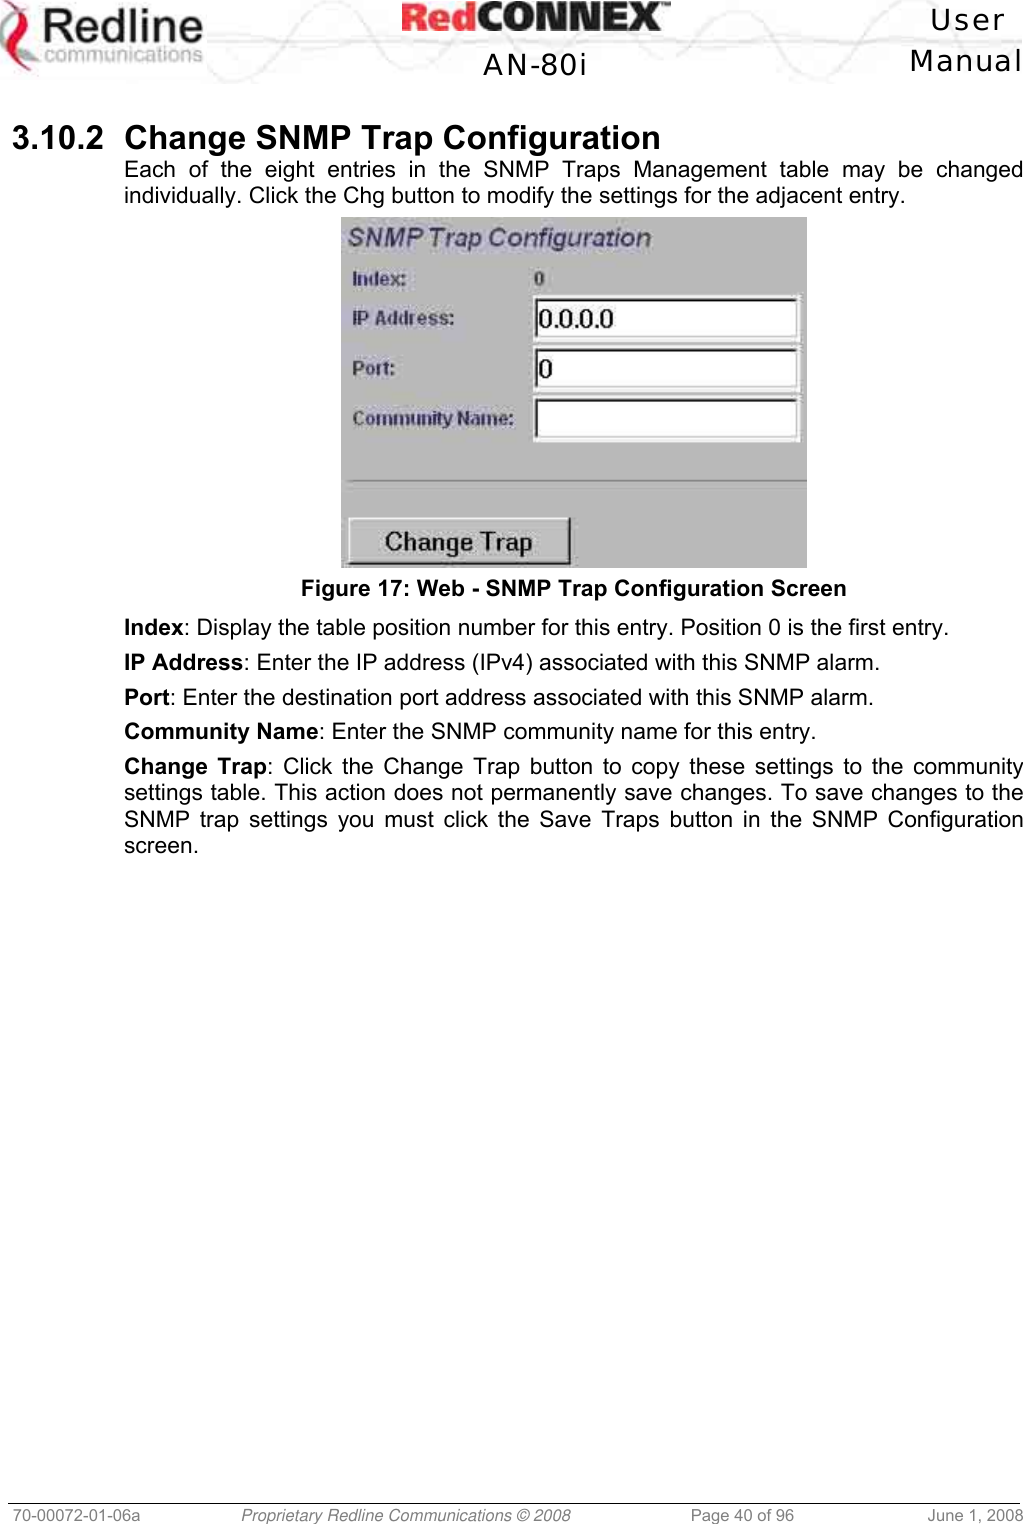   User  AN-80i Manual  70-00072-01-06a  Proprietary Redline Communications © 2008  Page 40 of 96  June 1, 2008  3.10.2  Change SNMP Trap Configuration Each of the eight entries in the SNMP Traps Management table may be changed individually. Click the Chg button to modify the settings for the adjacent entry.  Figure 17: Web - SNMP Trap Configuration Screen  Index: Display the table position number for this entry. Position 0 is the first entry. IP Address: Enter the IP address (IPv4) associated with this SNMP alarm. Port: Enter the destination port address associated with this SNMP alarm. Community Name: Enter the SNMP community name for this entry. Change Trap: Click the Change Trap button to copy these settings to the community settings table. This action does not permanently save changes. To save changes to the SNMP trap settings you must click the Save Traps button in the SNMP Configuration screen. 